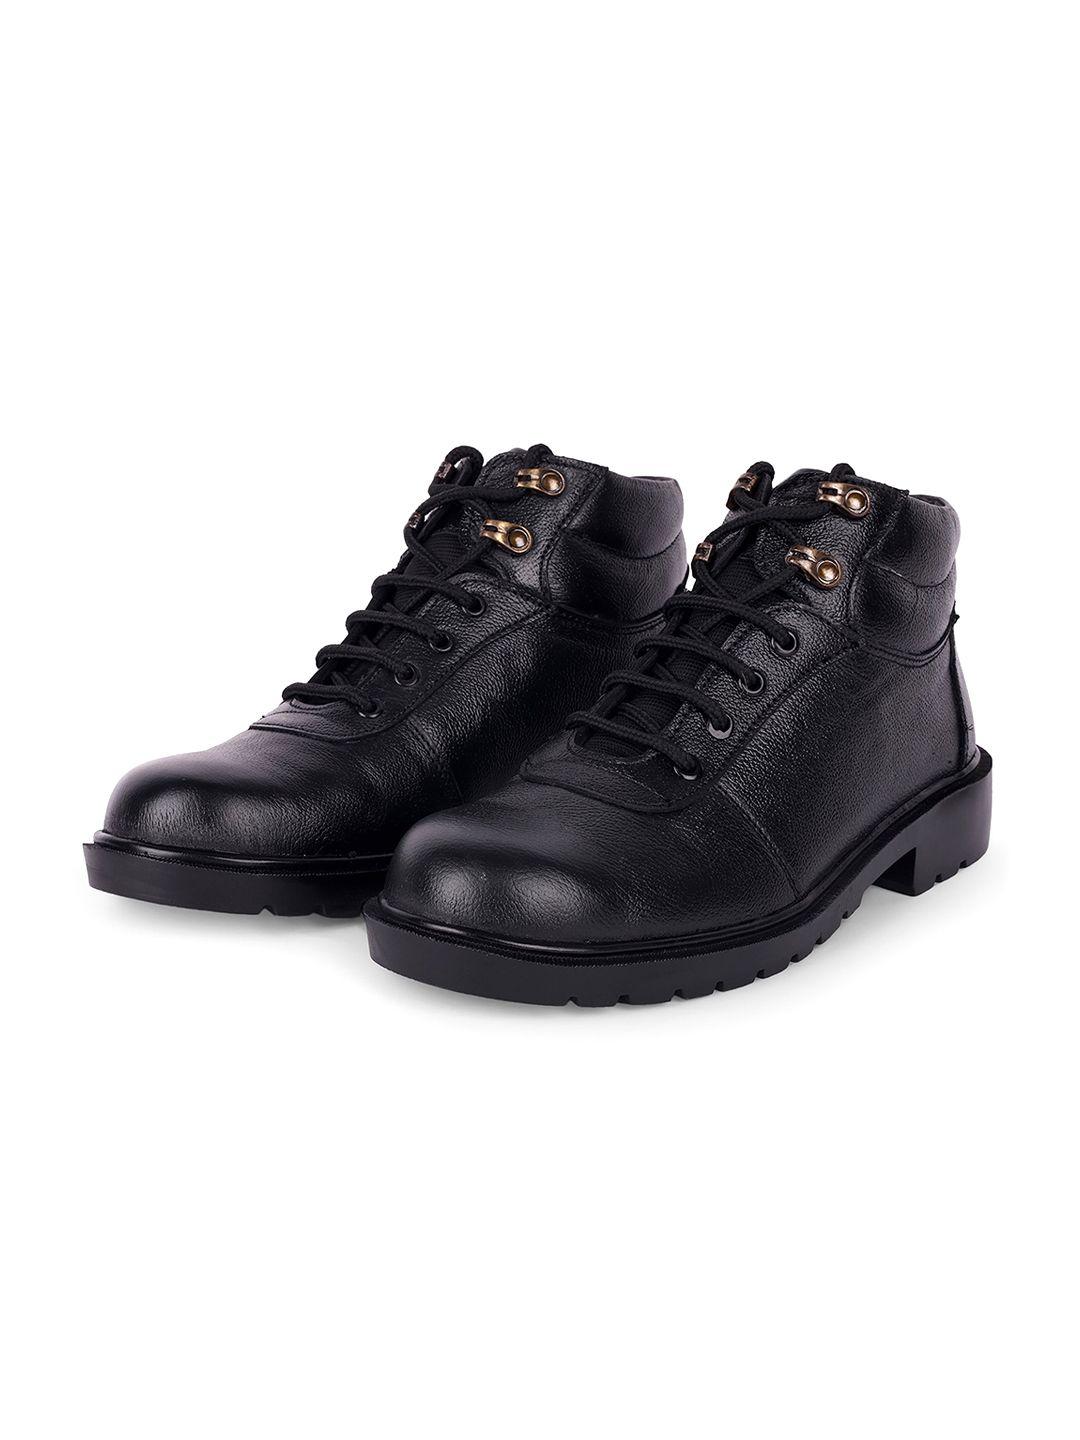 leo's fitness shoes men leather regular boots